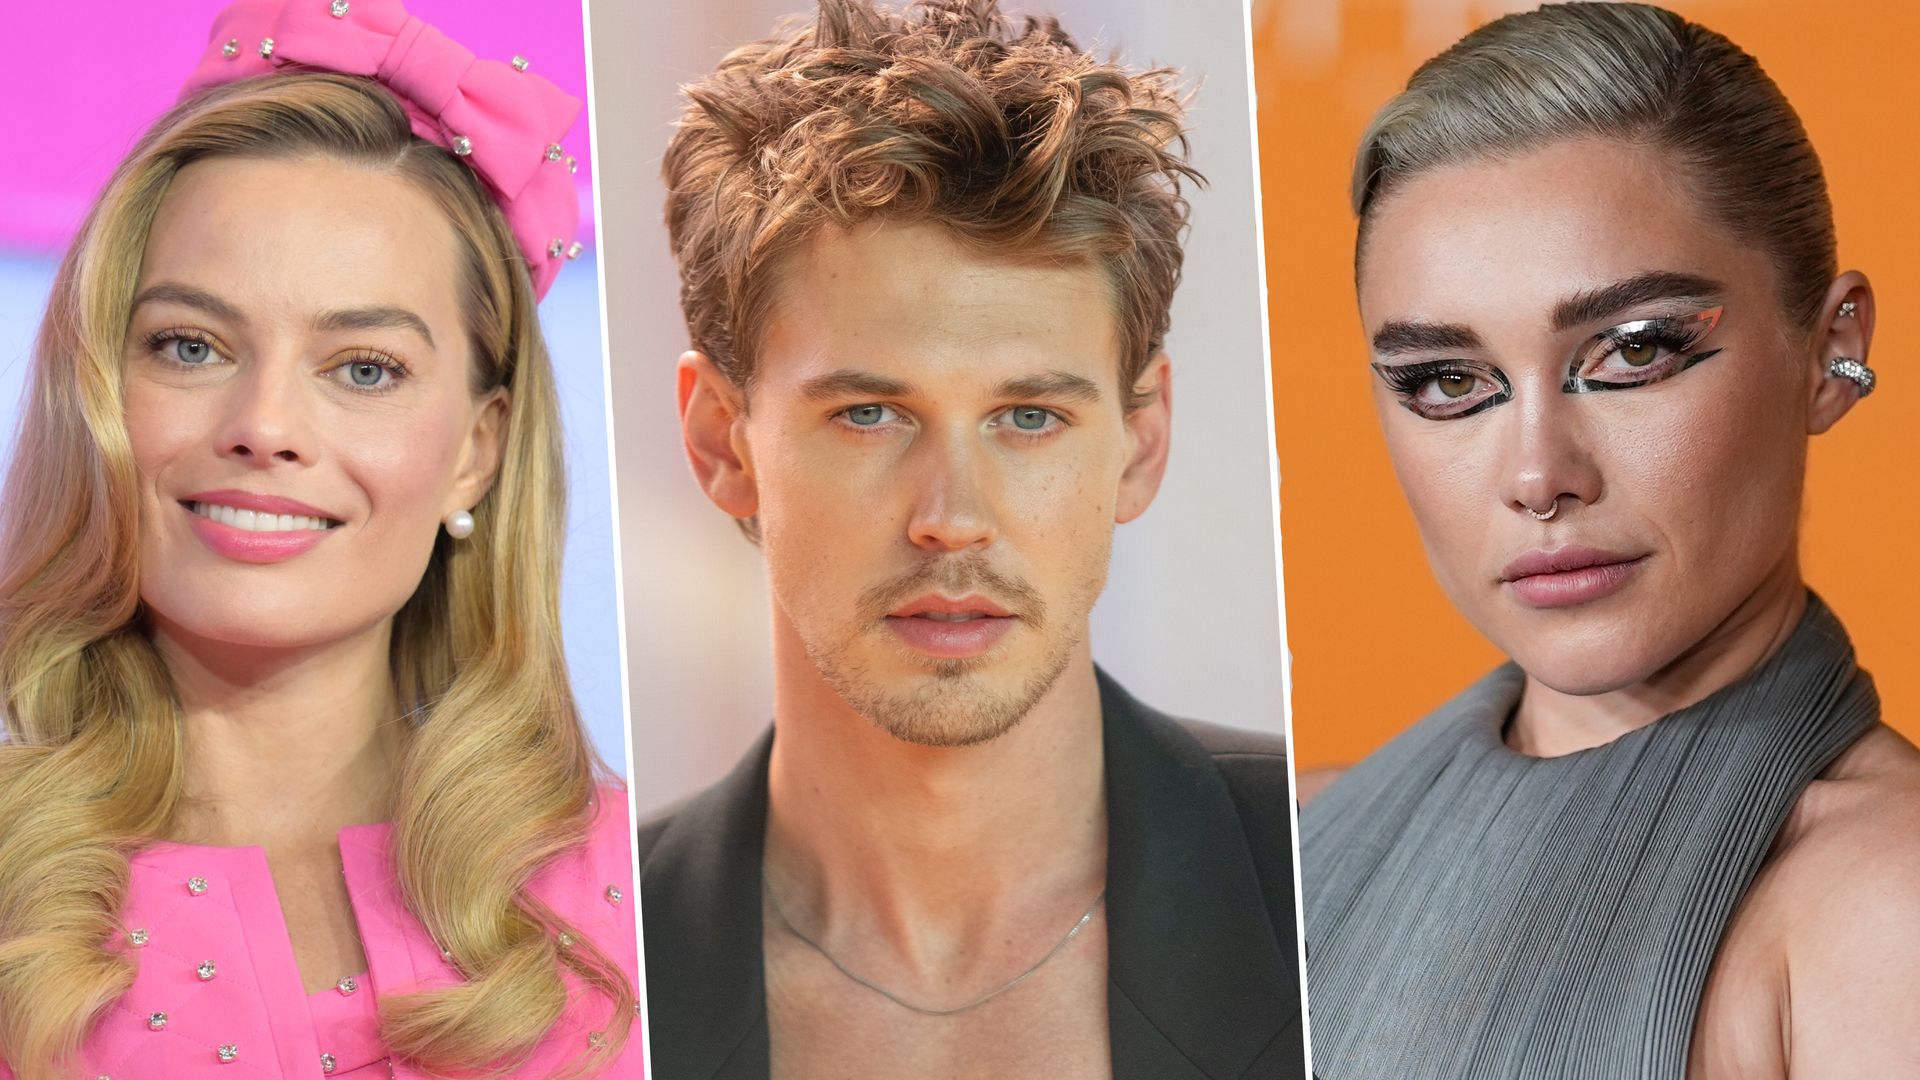 Austin Butler, Margot Robbie and Florence Pugh's make-up and hair stylists share secrets of working with Oscar nominees